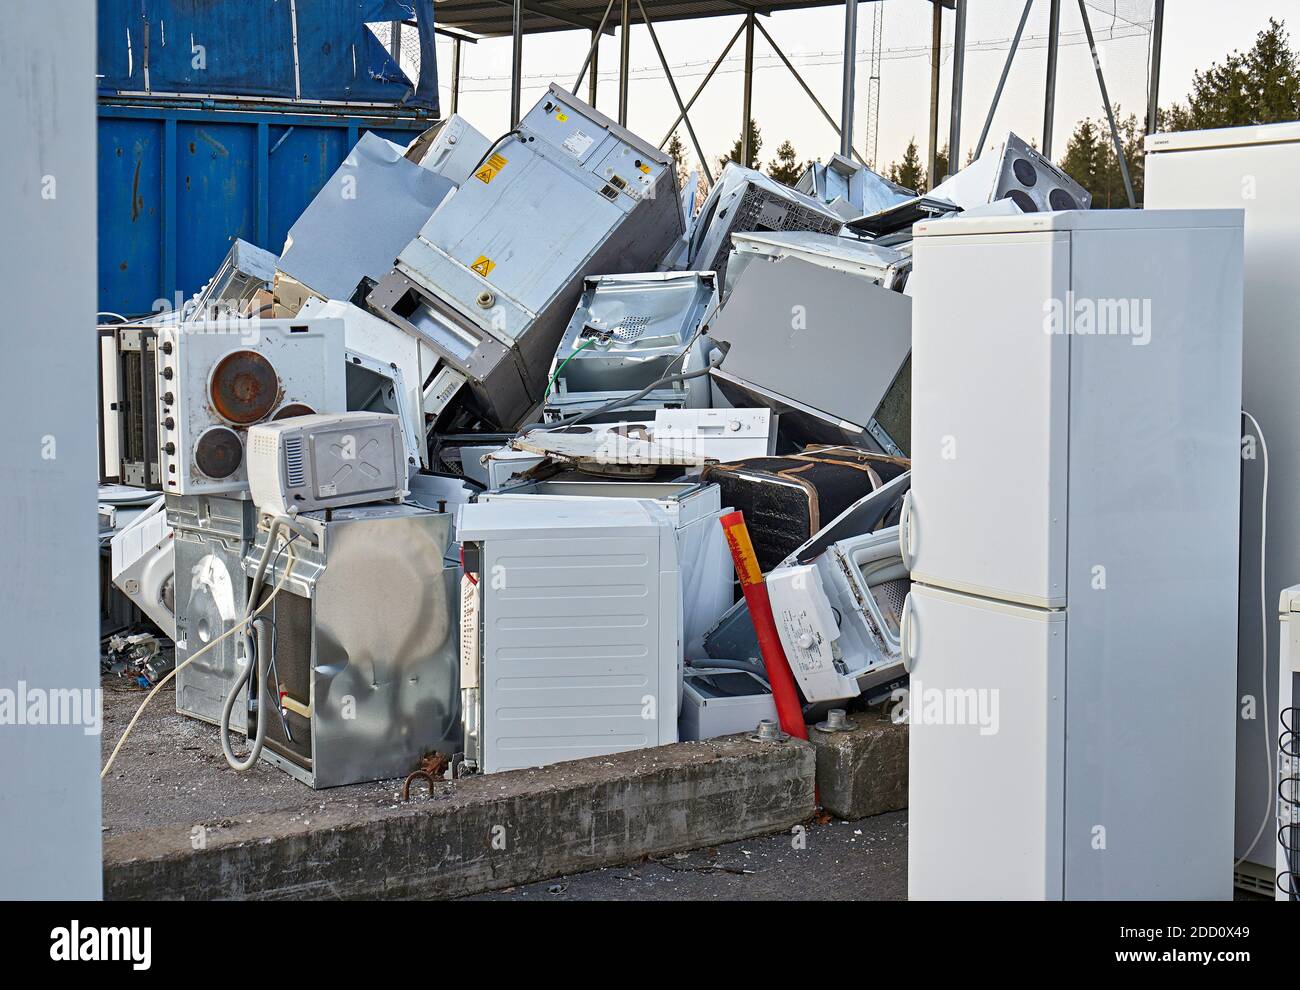 A pile of disposed white goods at municipal waste depot Flen Sweden Stock Photo